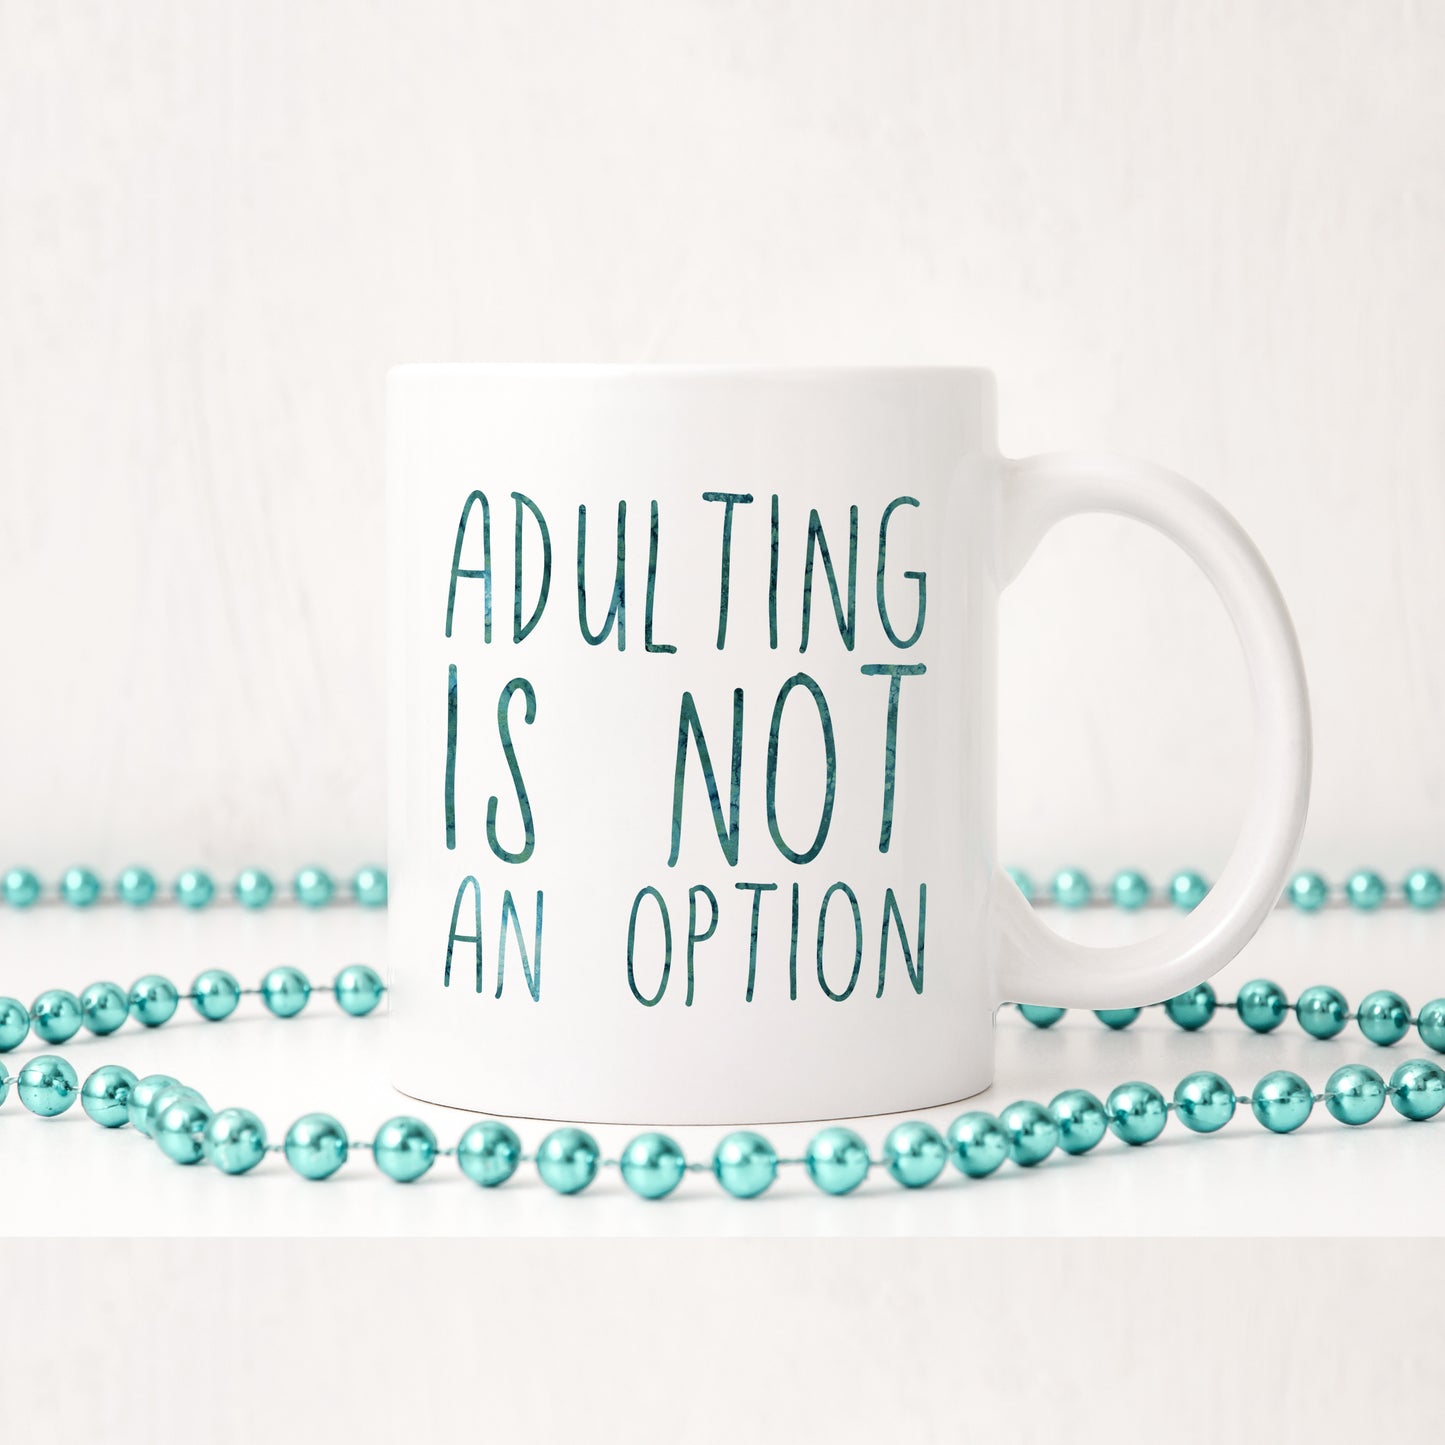 Adulting is not an option | Ceramic mug